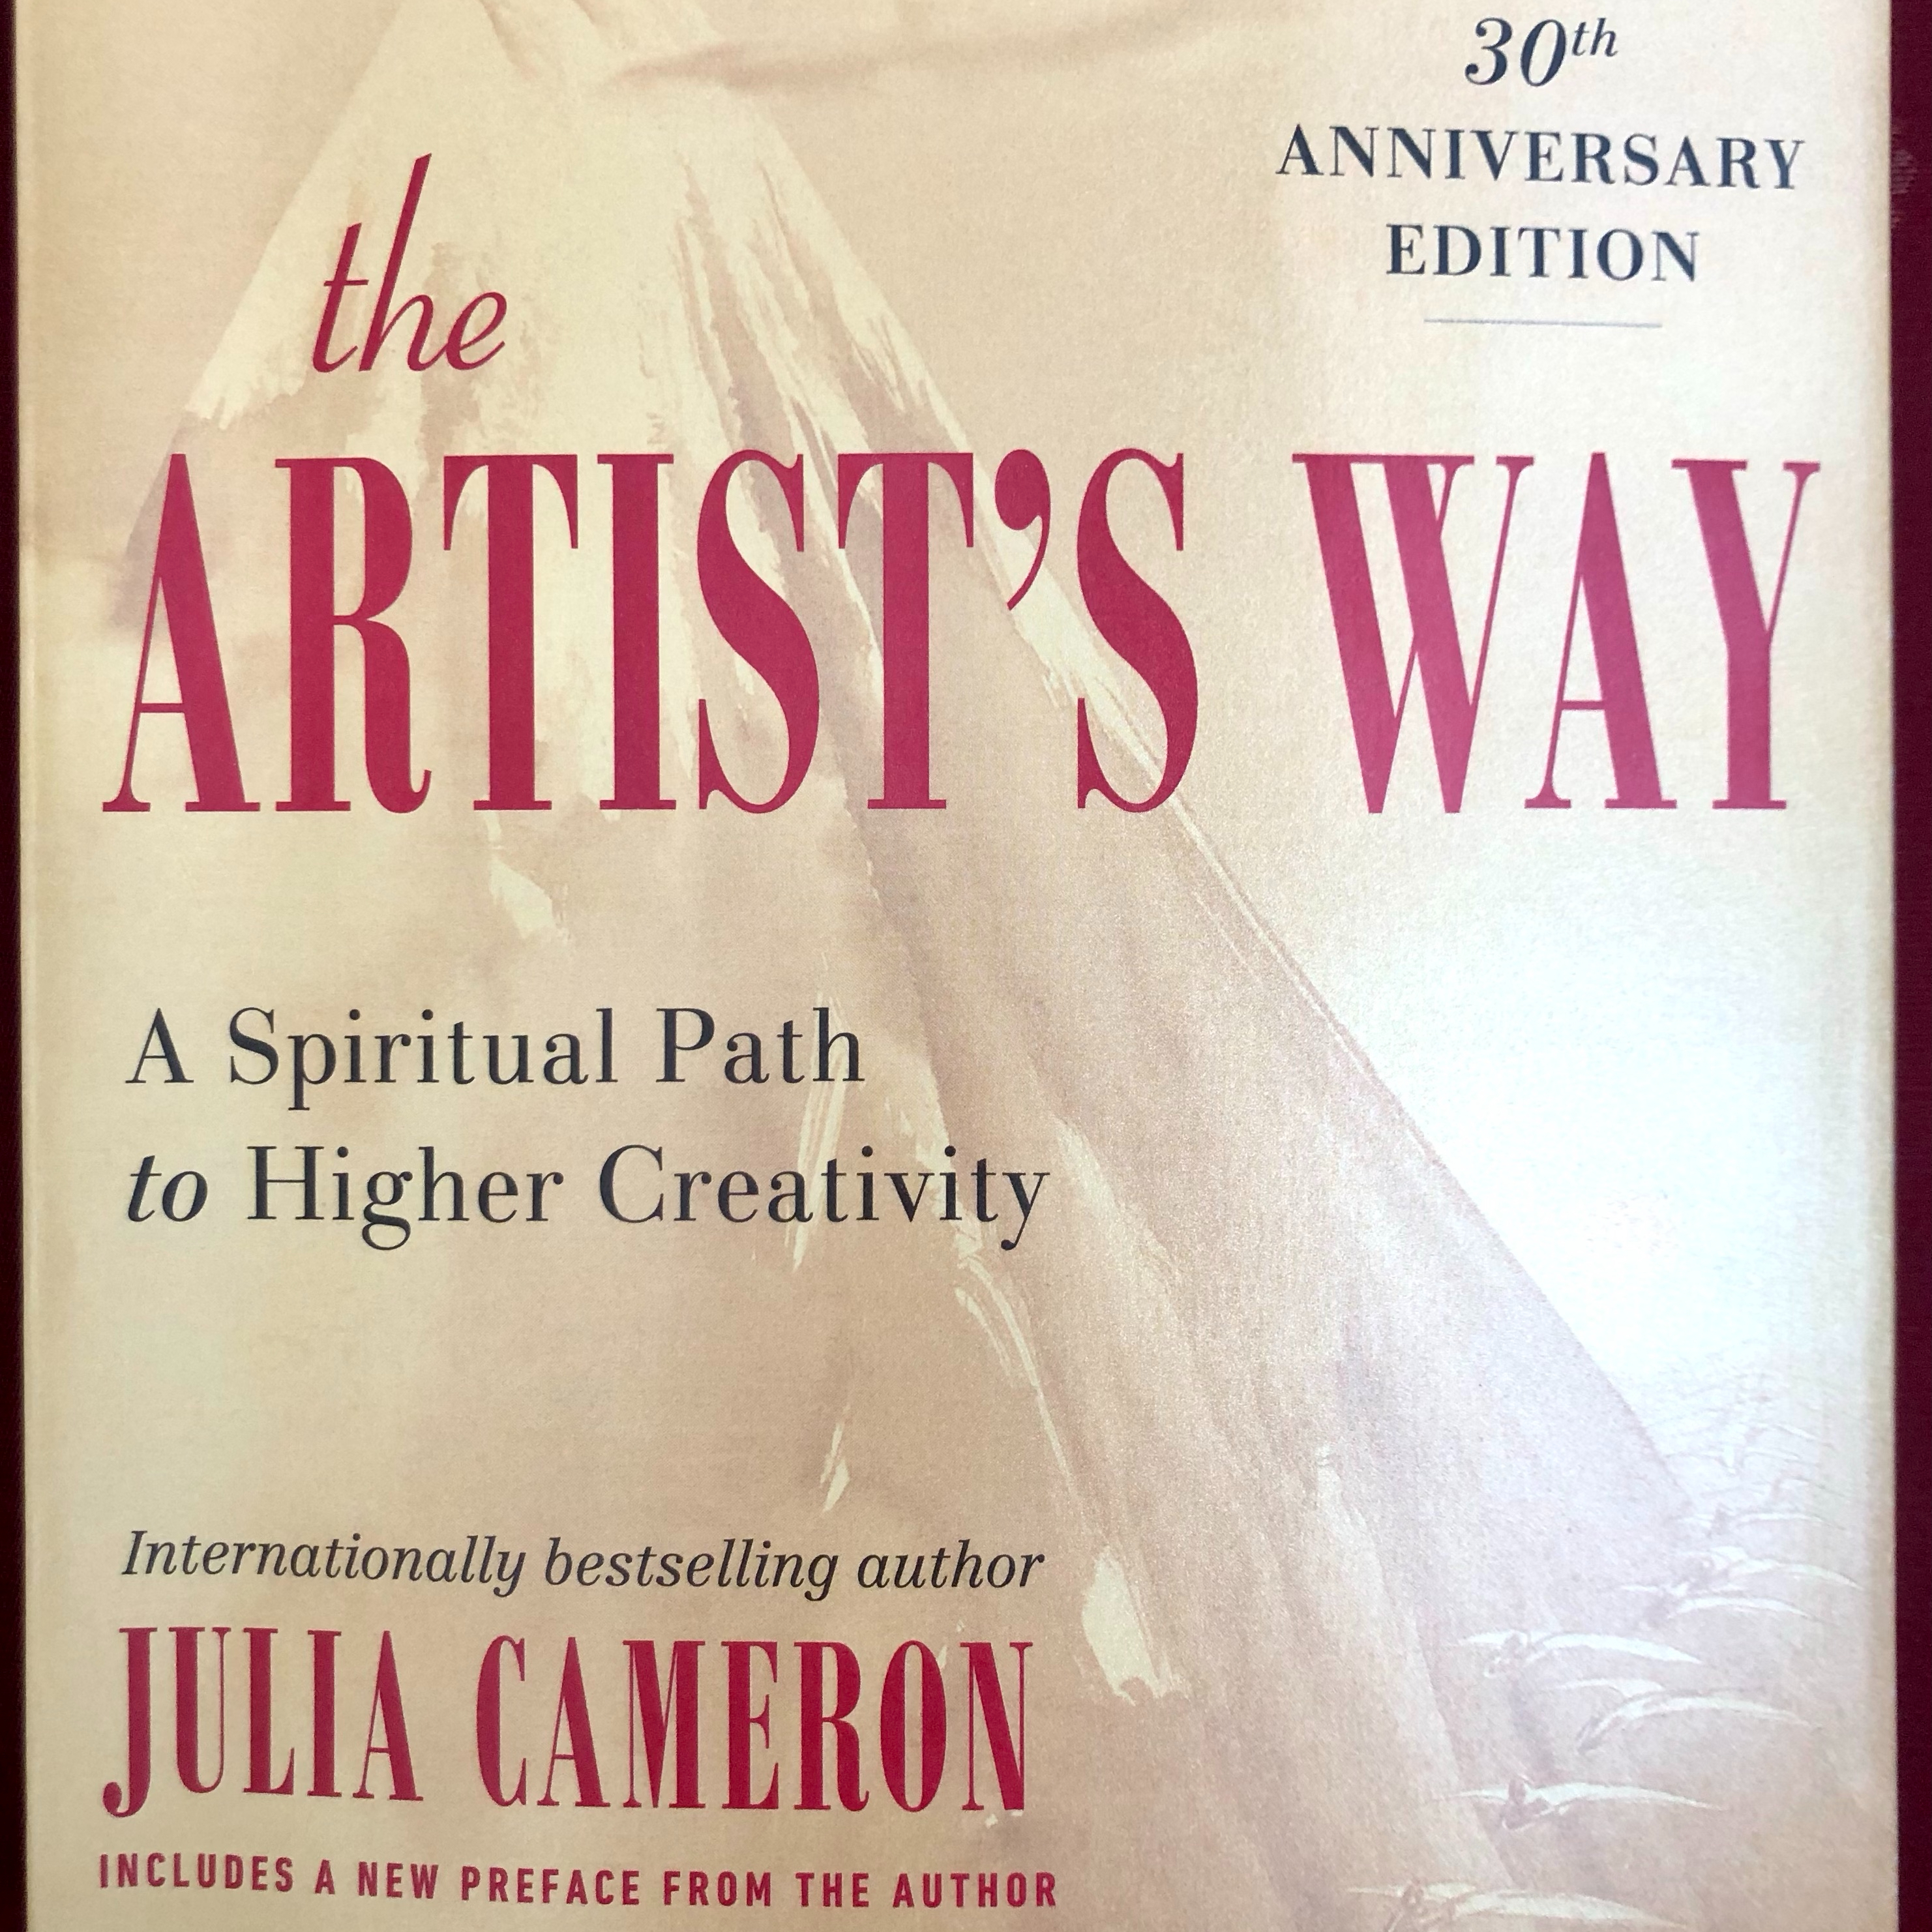 Authors copy of The Artist's Way by Julia Cameron